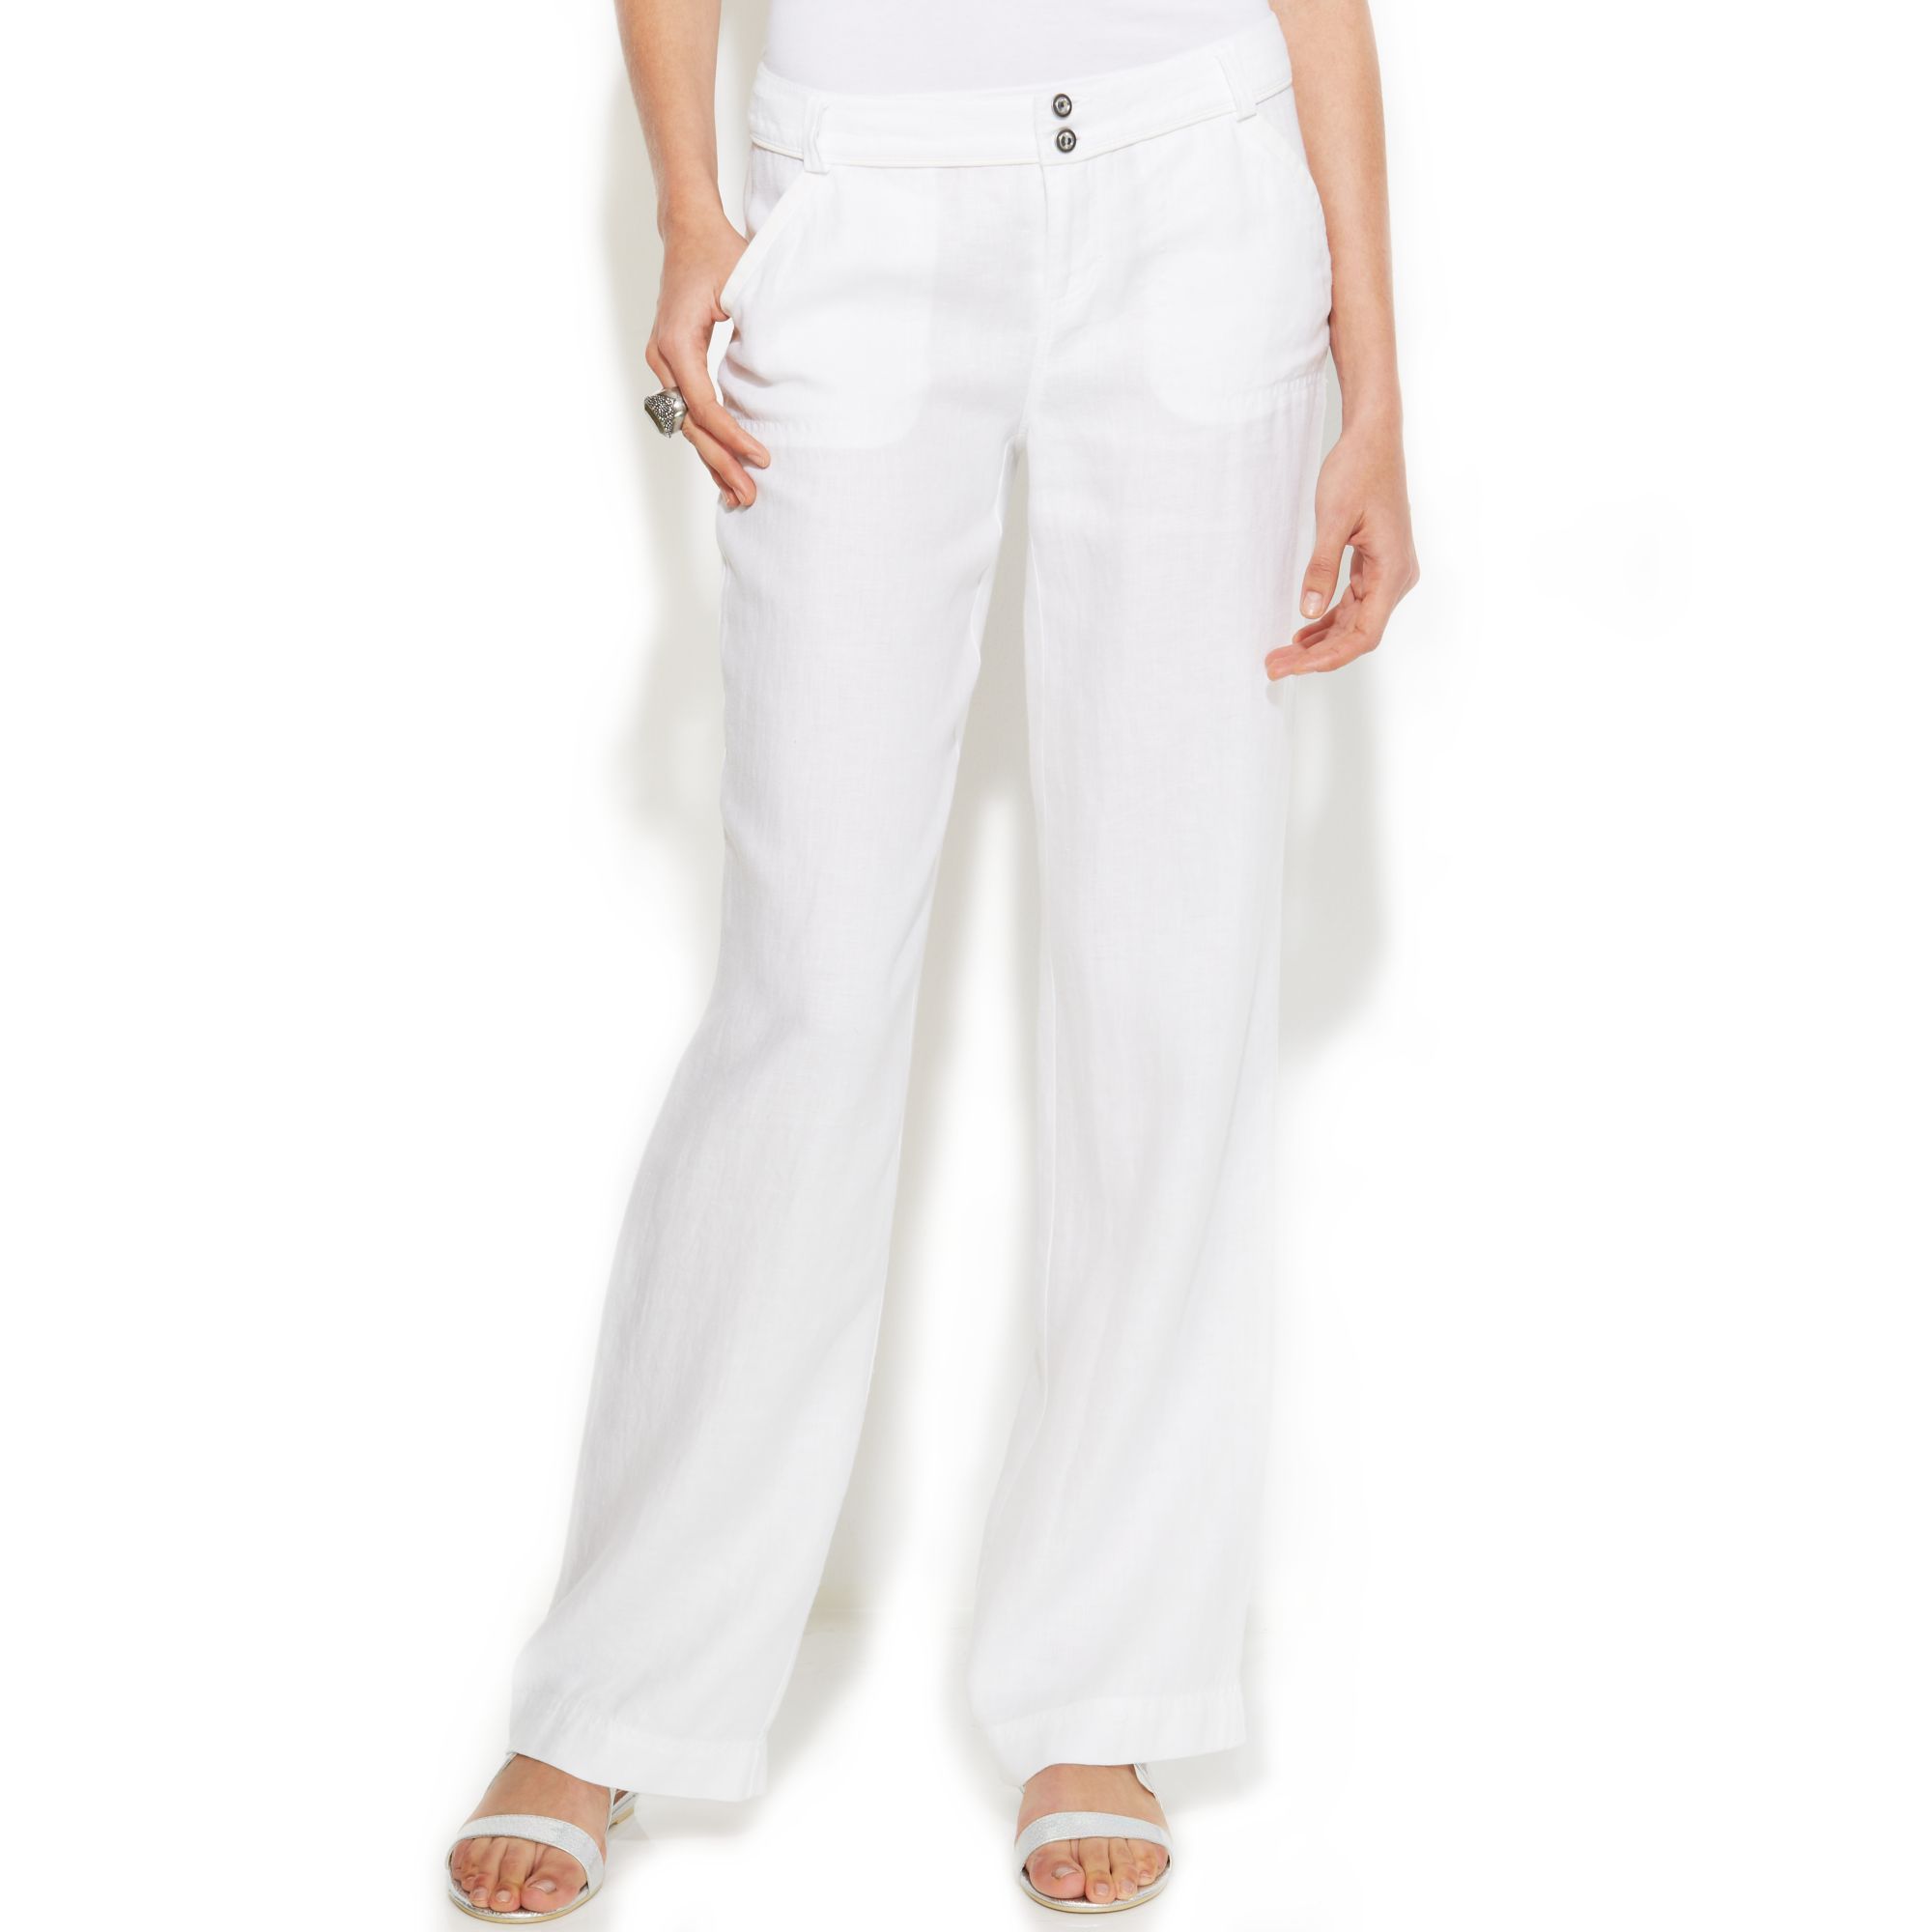 Inc international concepts Linen Pants in White | Lyst